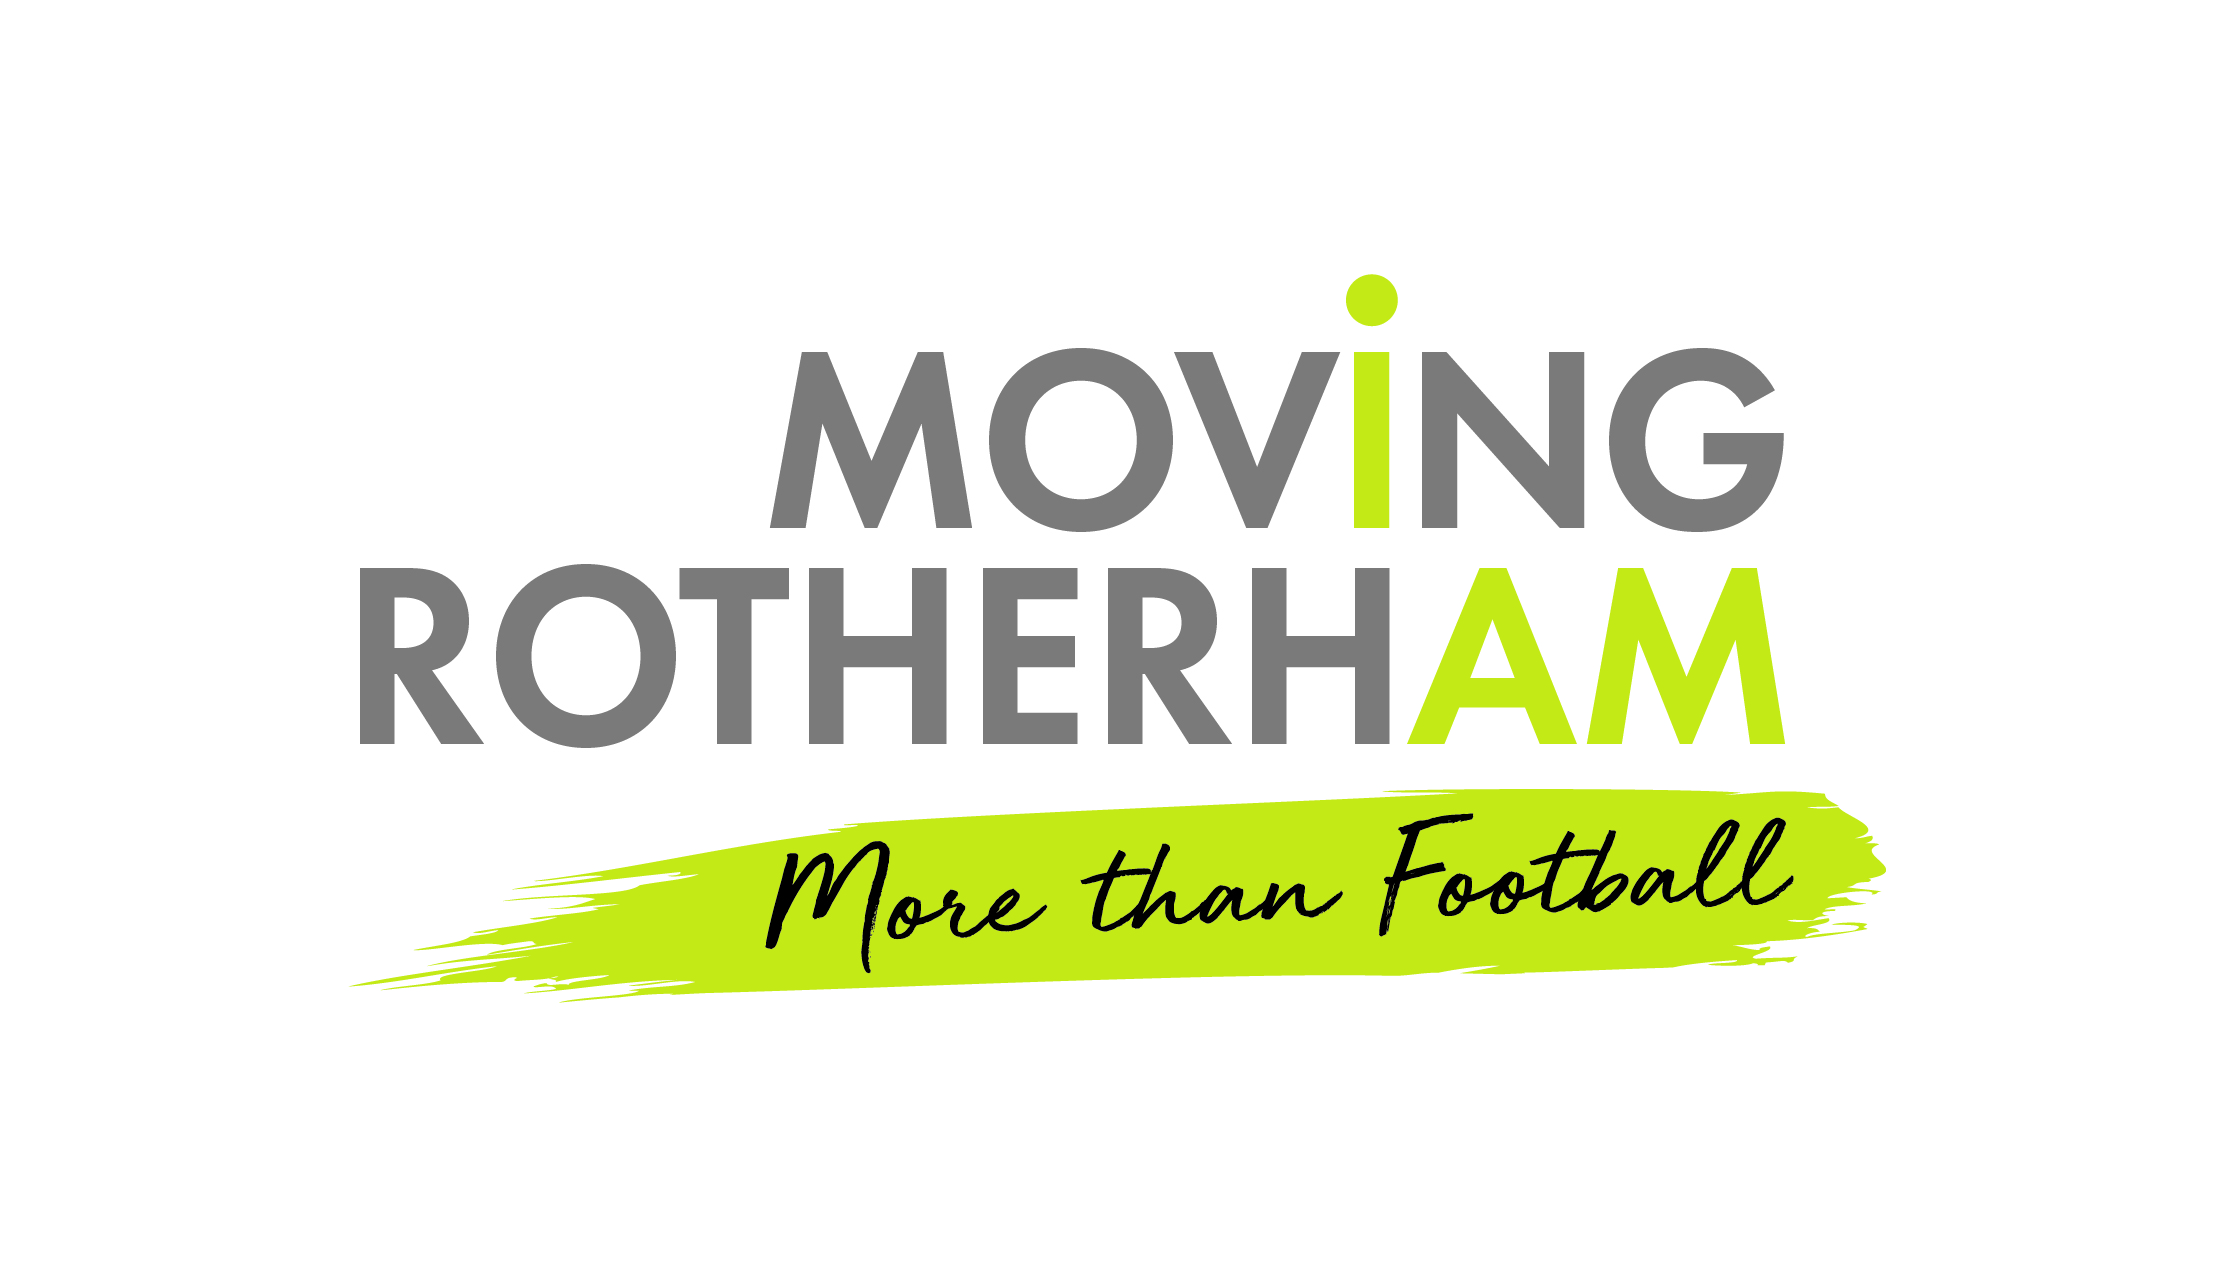 Moving Rotherham - More than football